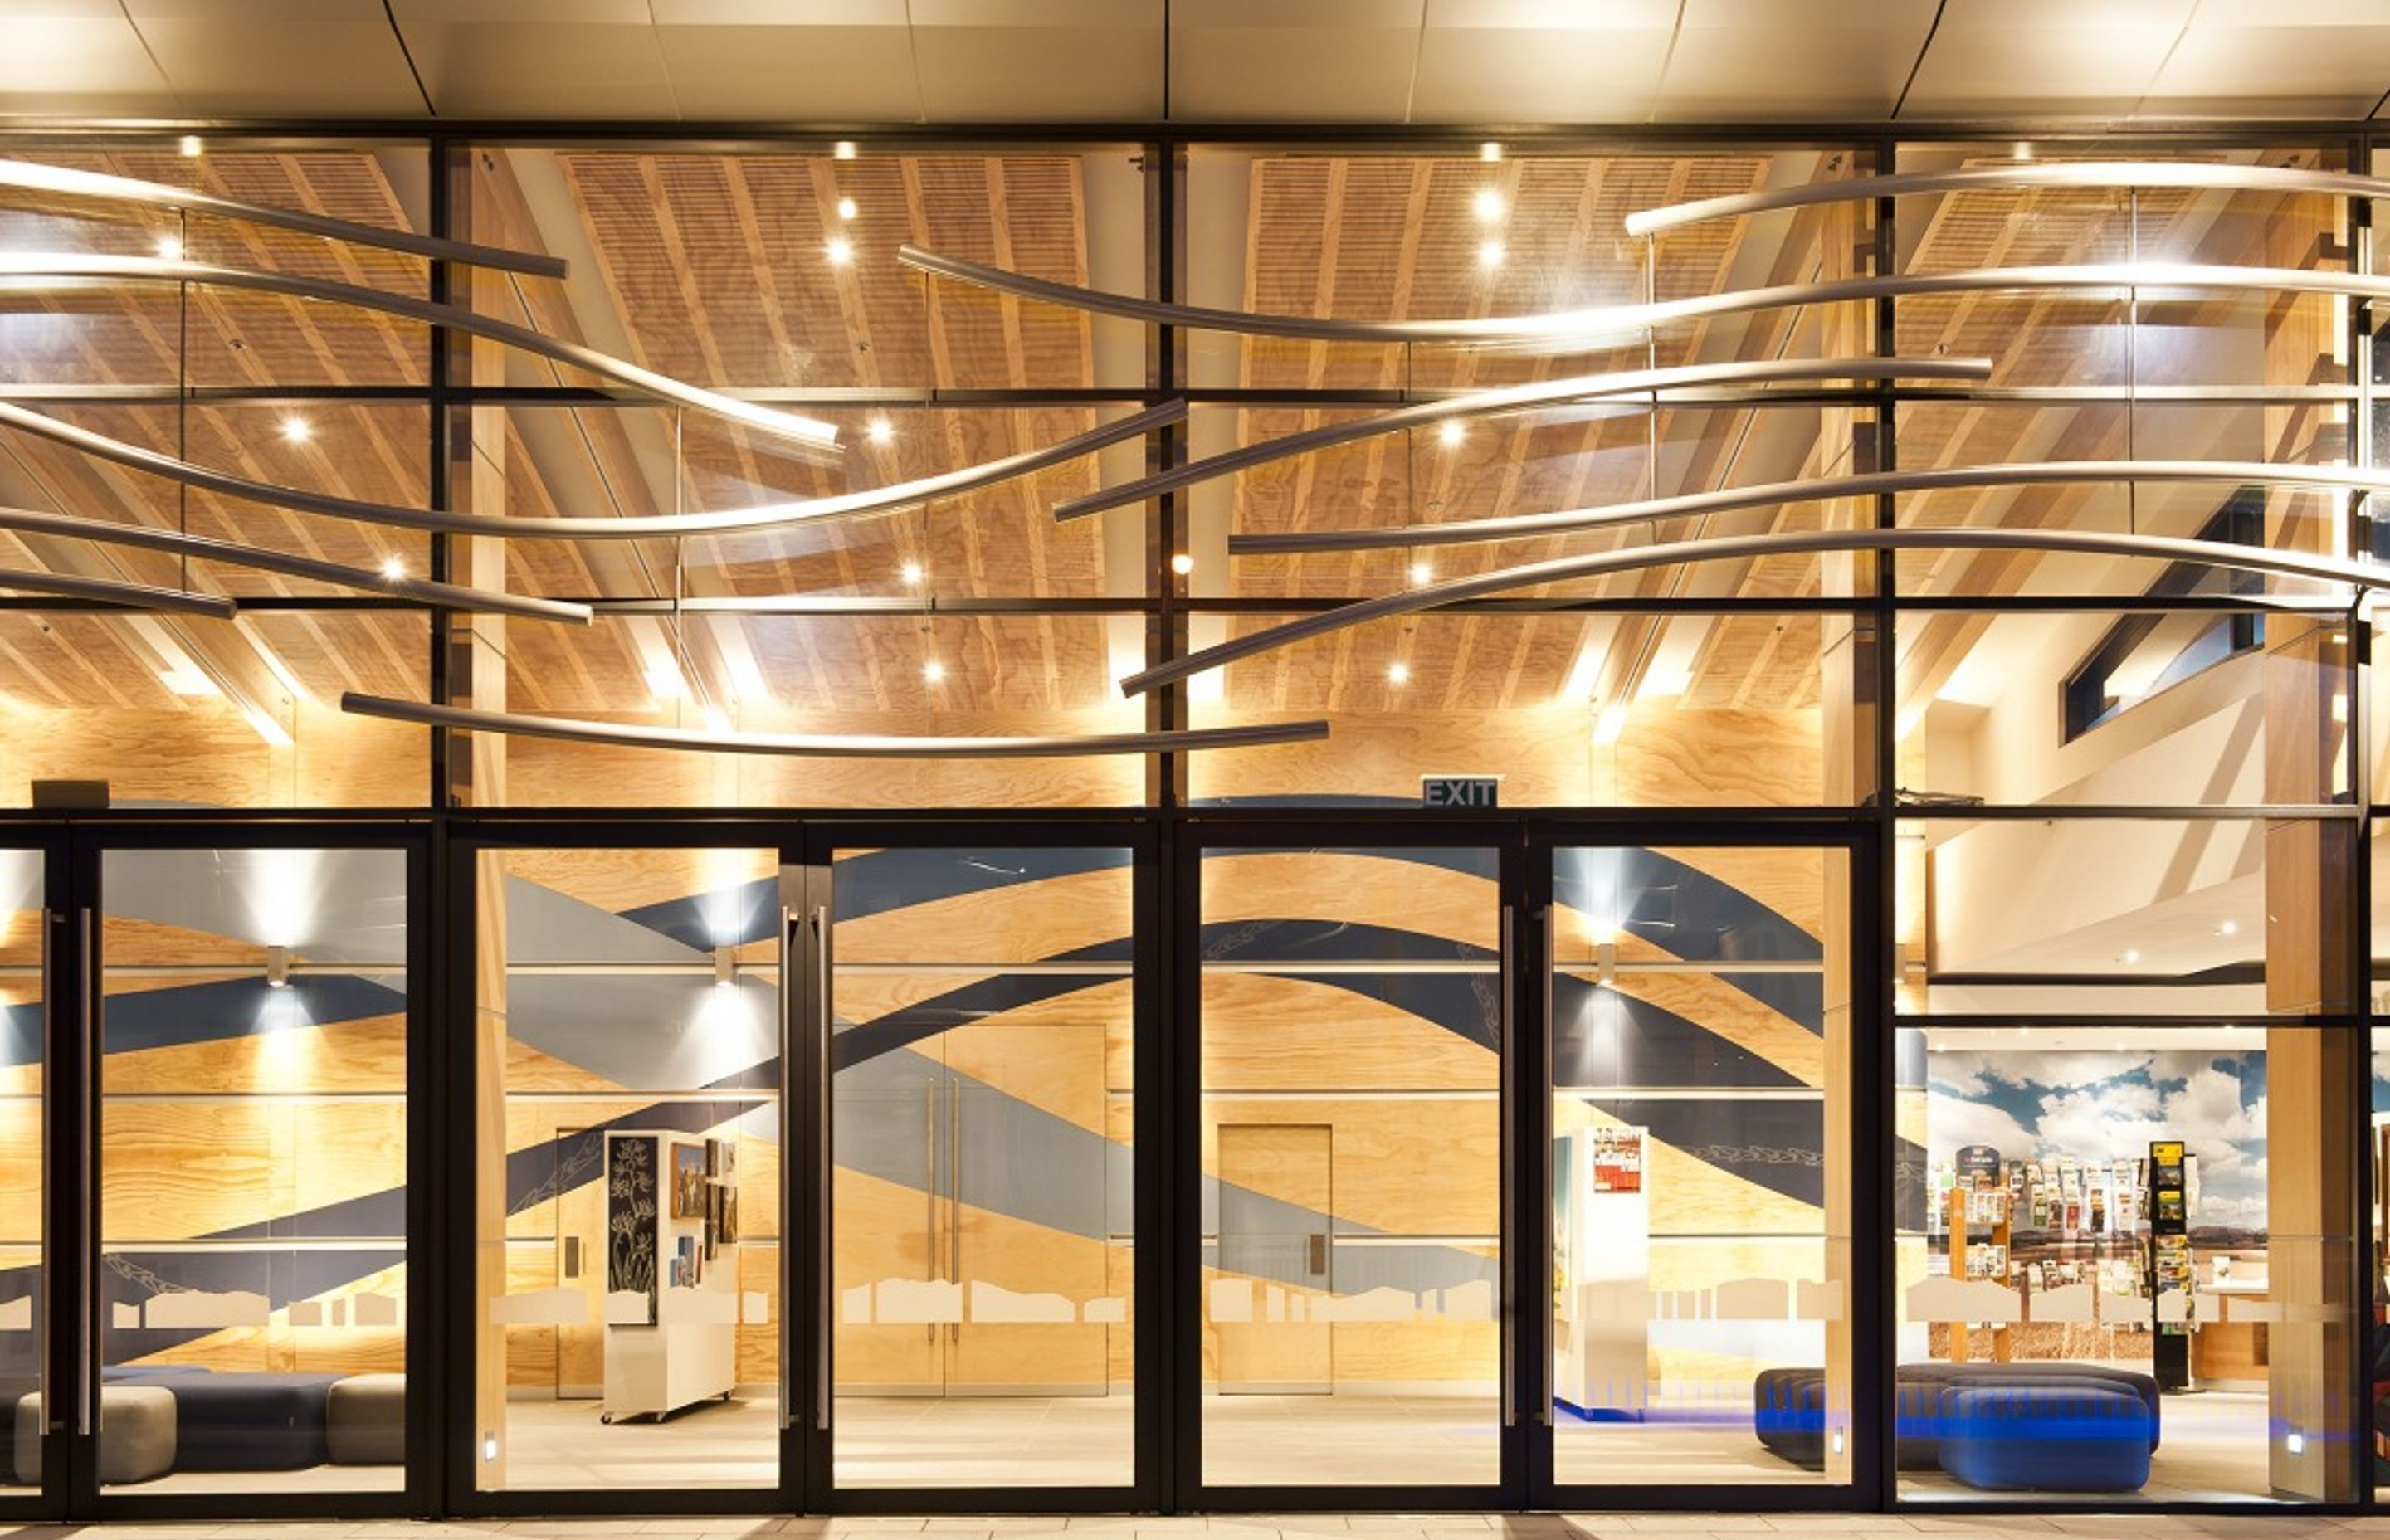 The Carterton Events Centre showcases the strength and style of Radiata Pine.